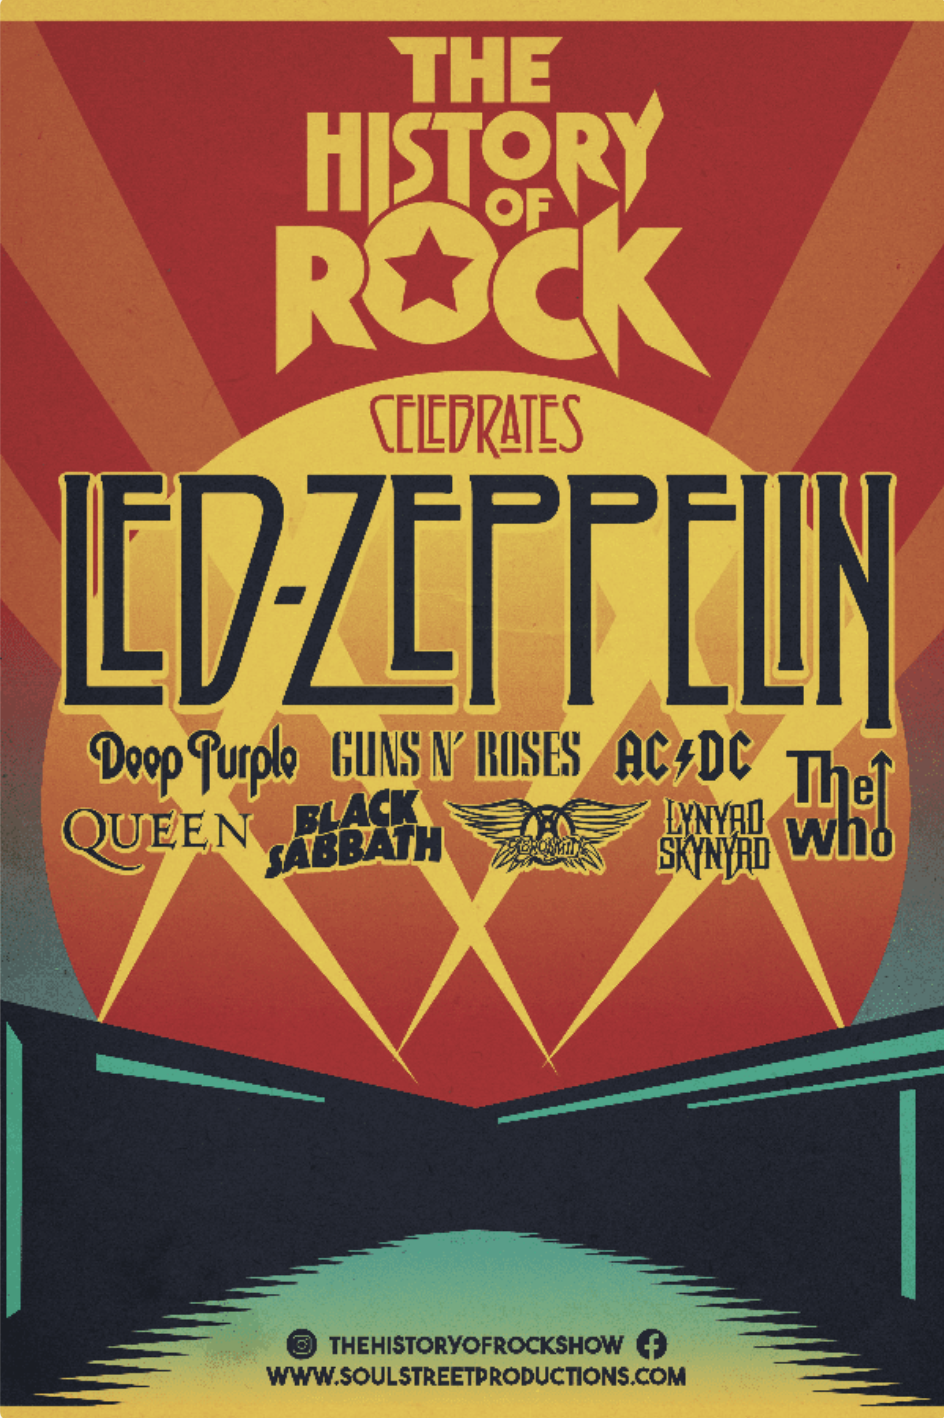 The History of Rock Led Zeppelin poster